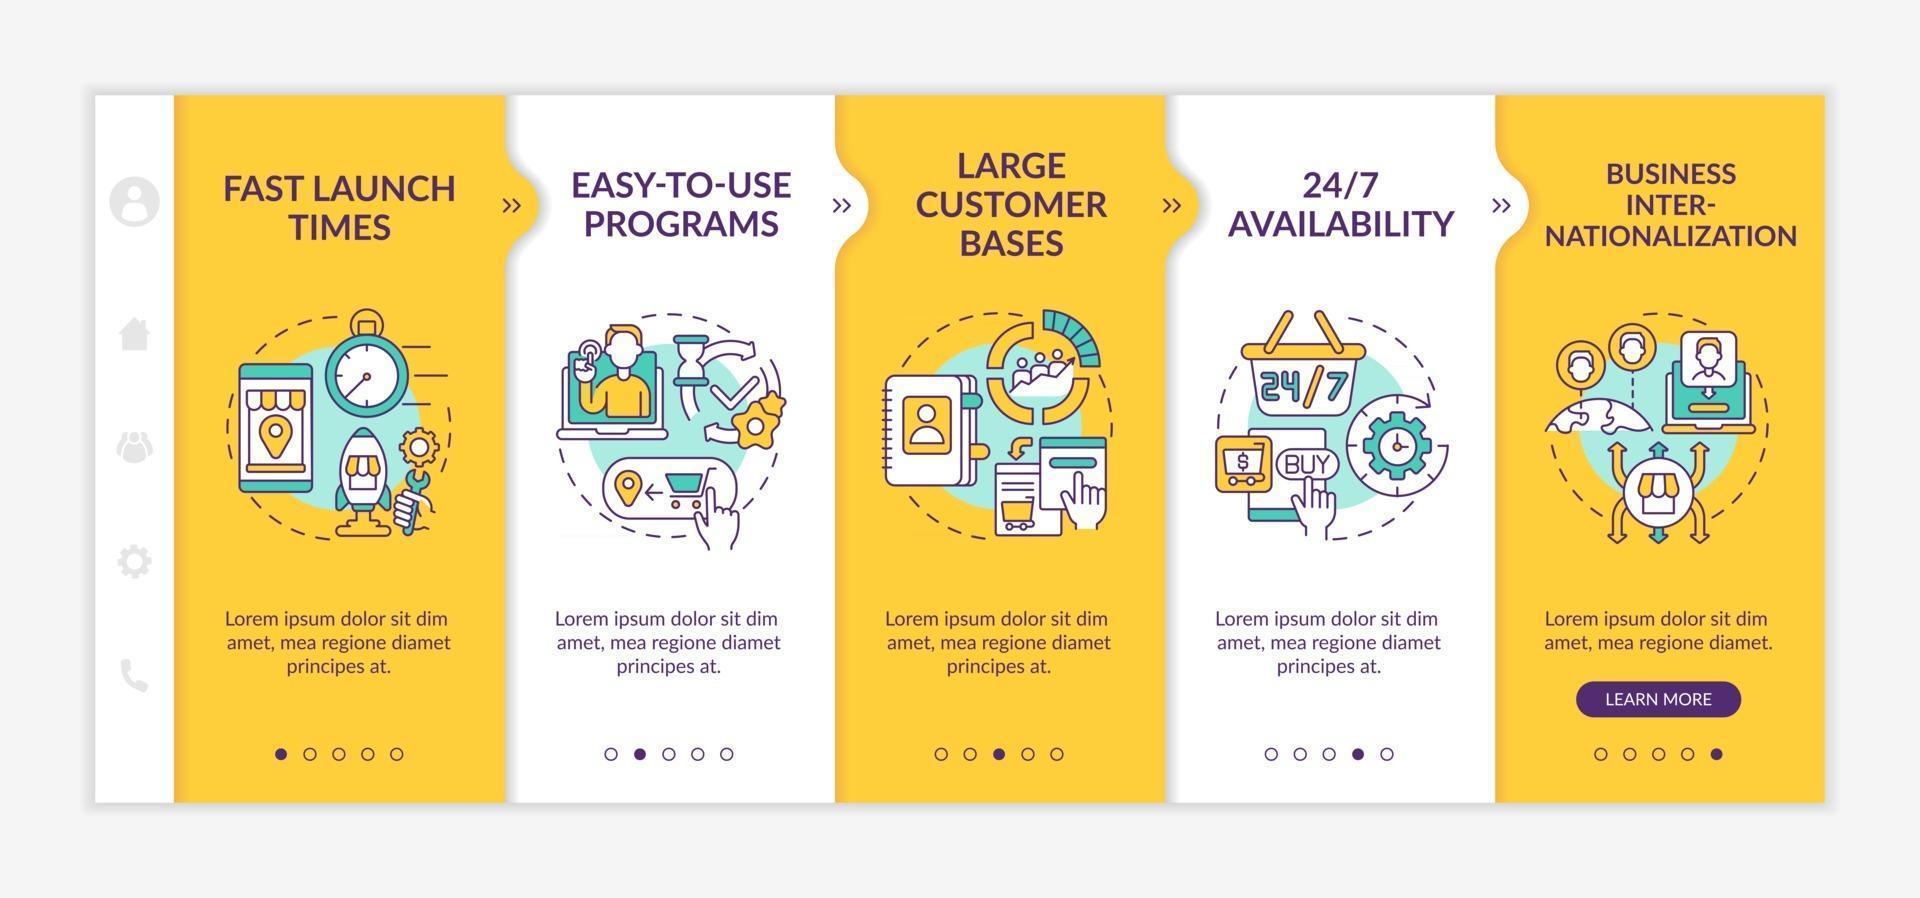 Online market place benefits onboarding vector template. Responsive mobile website with icons. Web page walkthrough 5 step screens. Easy-to-use programs color concept with linear illustrations